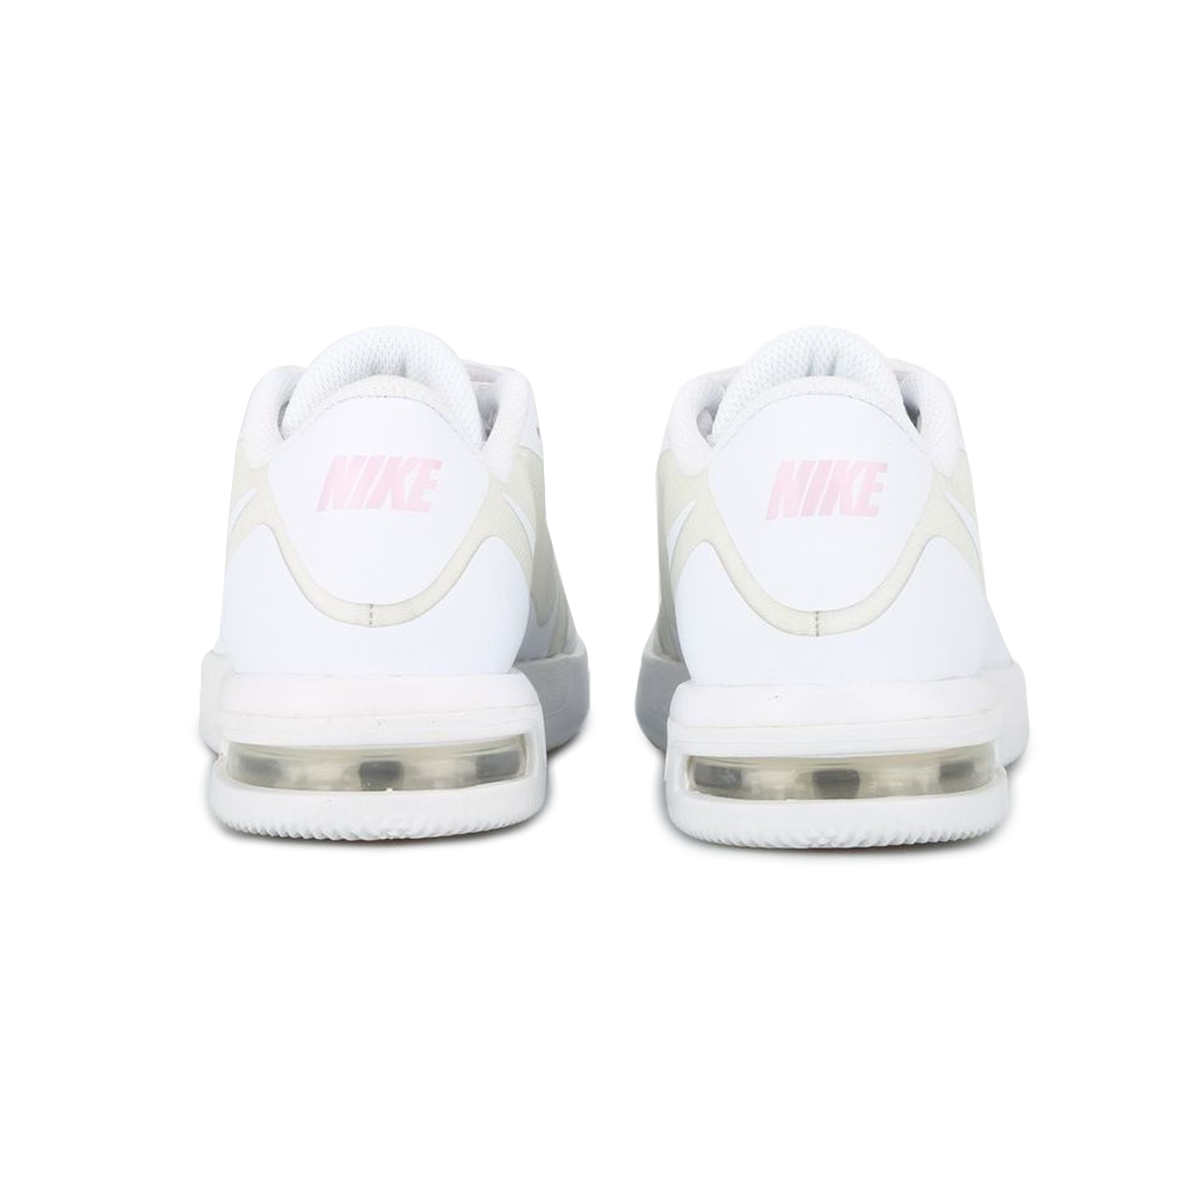 Zapatillas Nike Court Air Max Vapor Wing Ms,  image number null